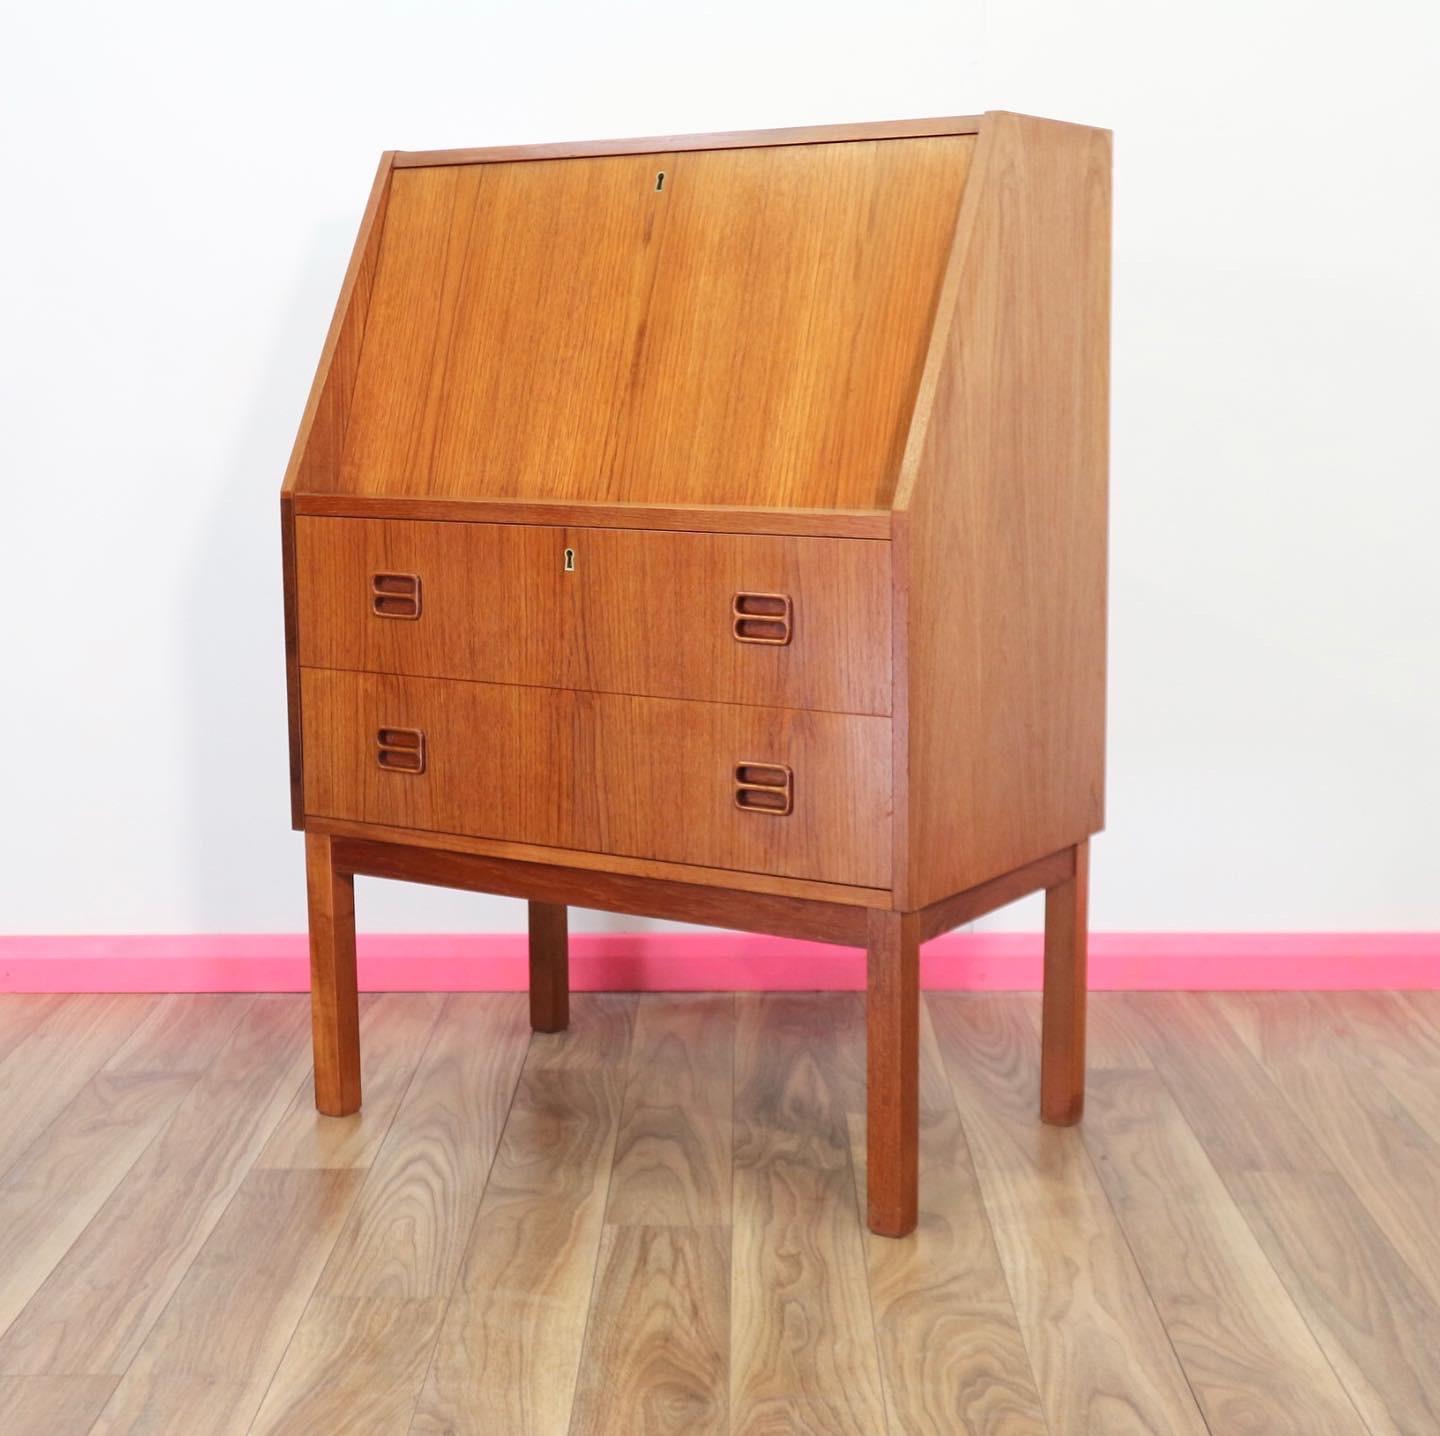 This gorgeous bureau by Gunnar Nielsen of Denmark is a fantastic piece as well as being pleaseing on the eye it is a useful piece for working at. Featuring a drop down desk and plenty of storage it would be great for home working.